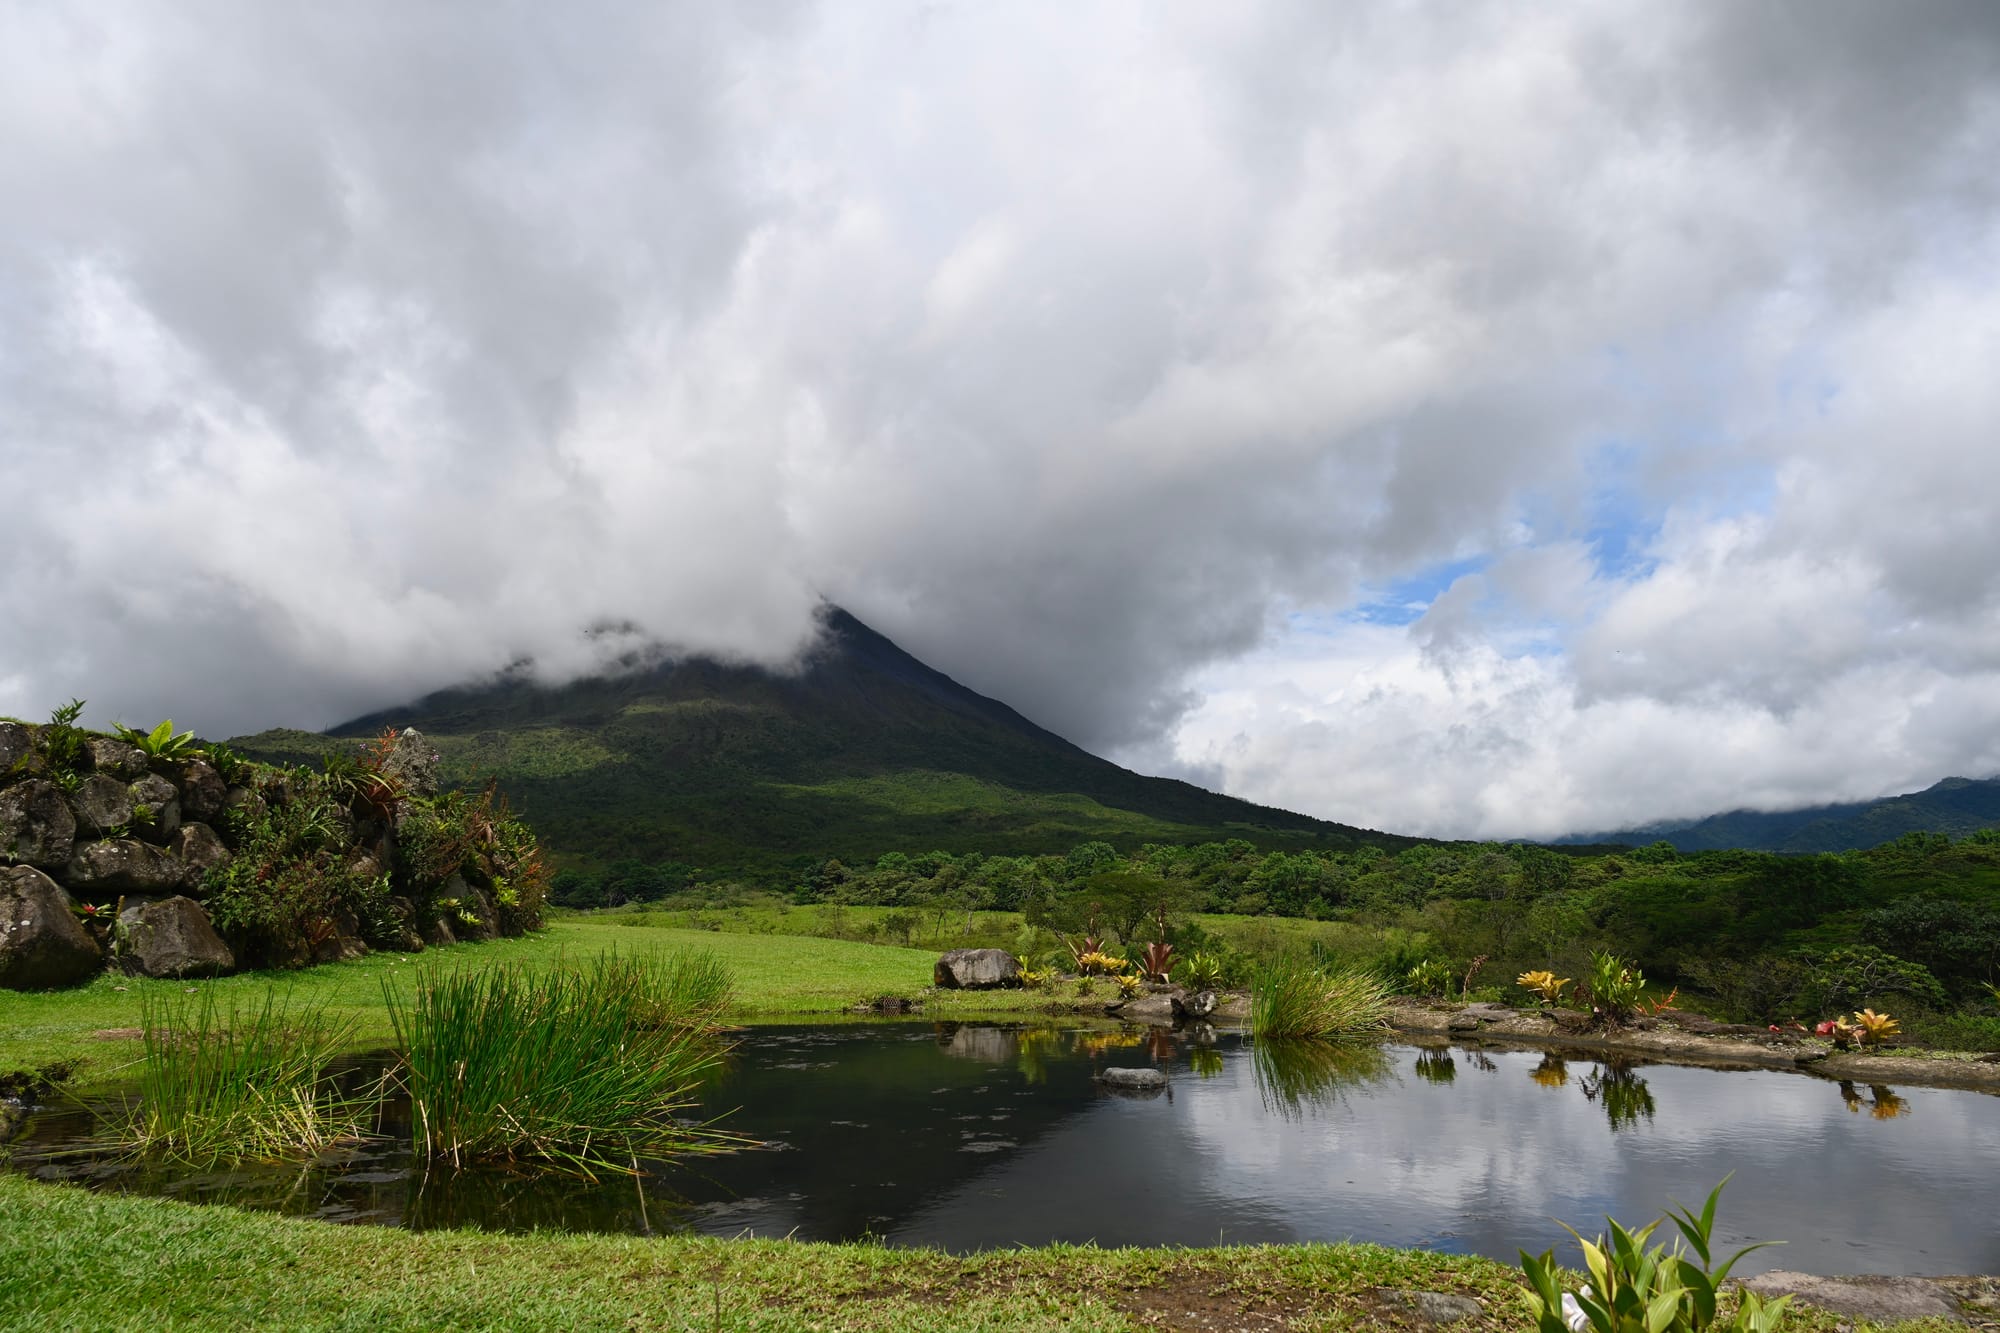 Arenal Volcano in Costa Rica is covered by clouds, with a tranquil pond is surrounded by lush greenery and flowering plants.